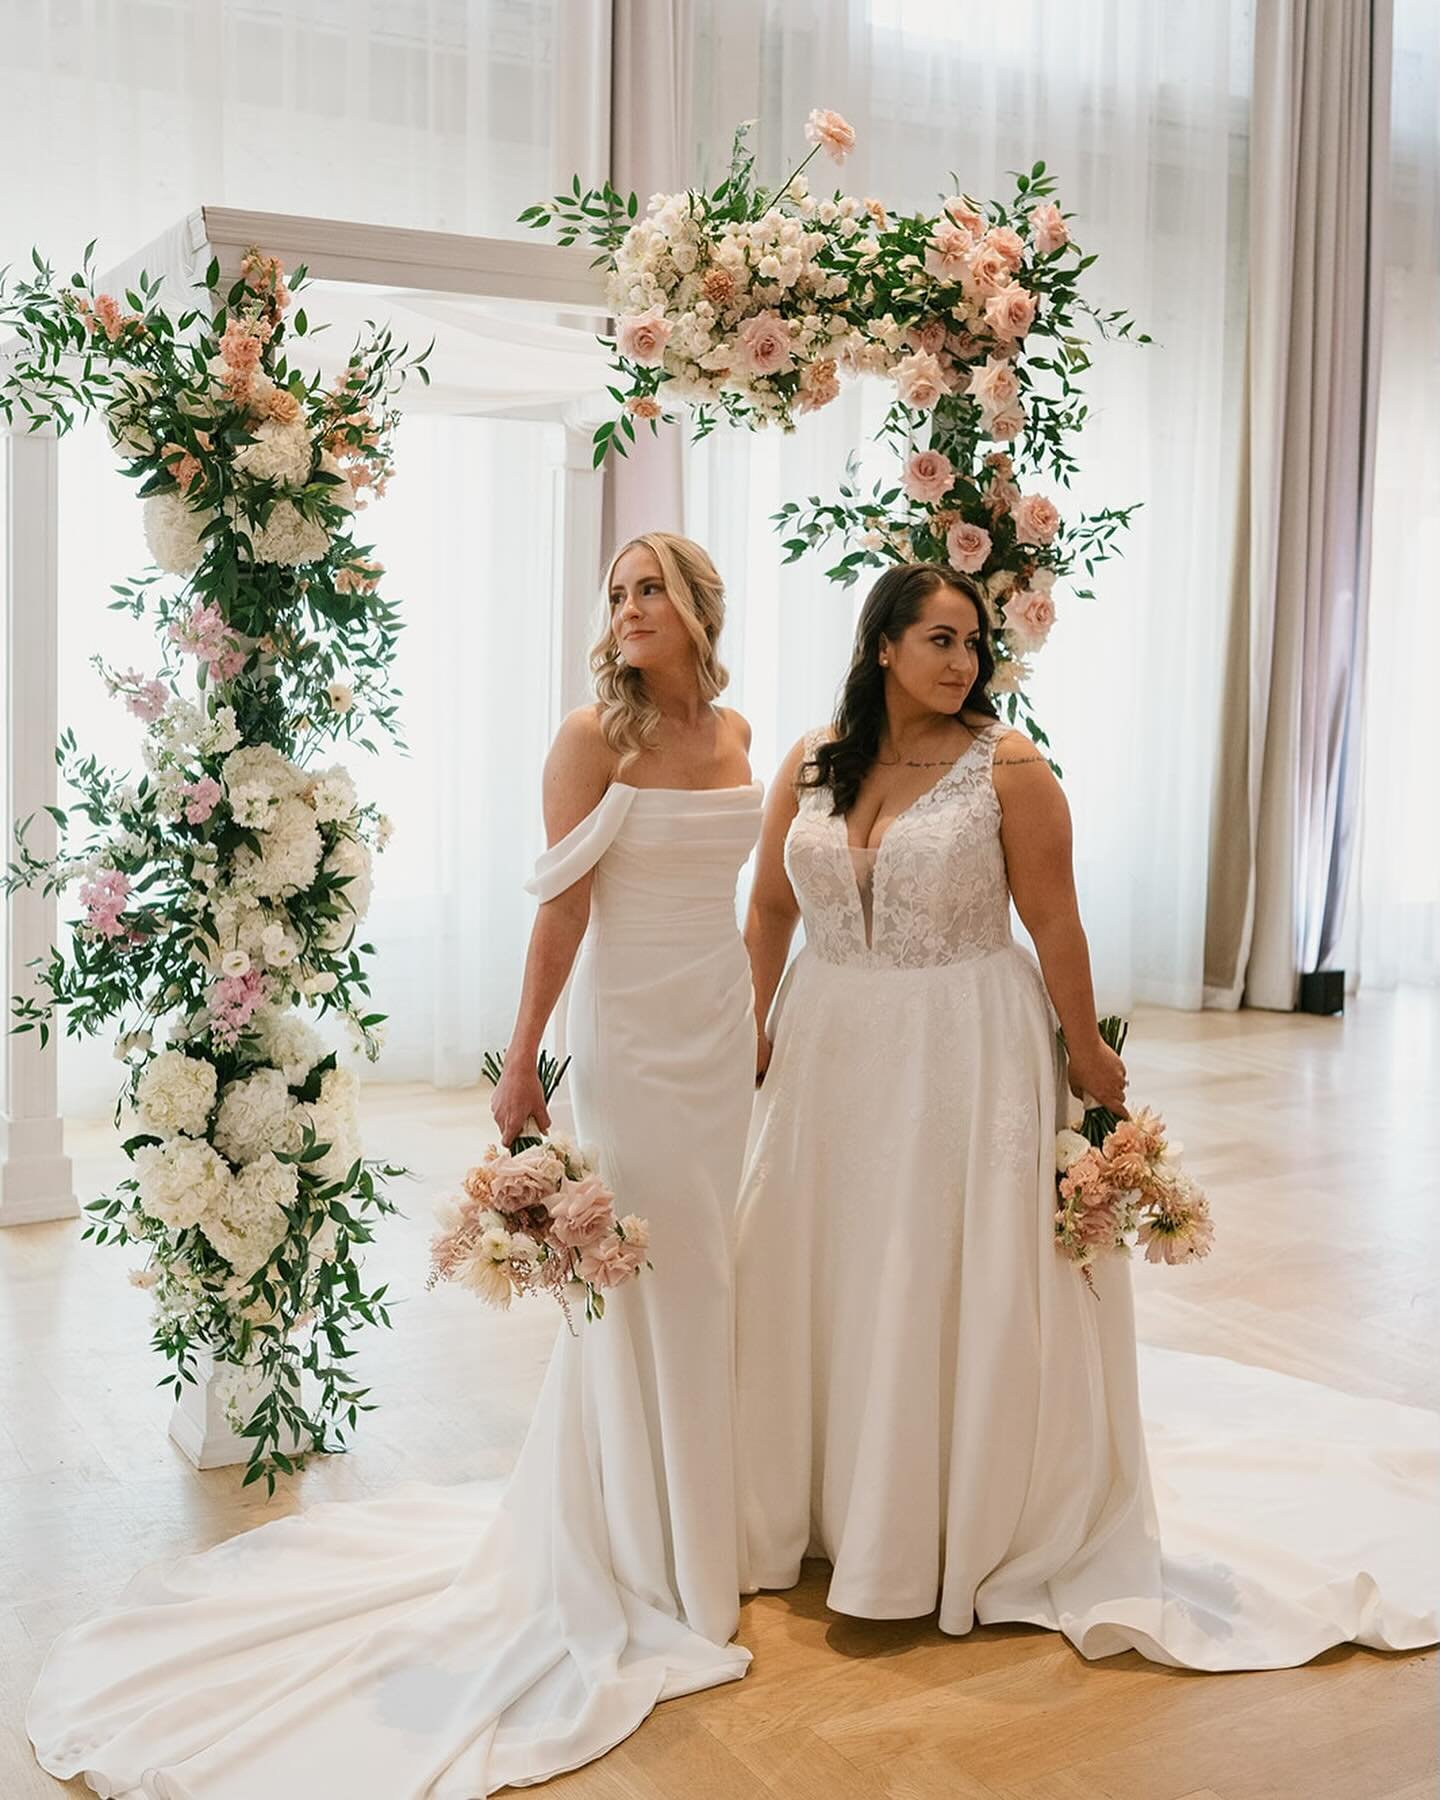 The most stunning sneak peeks from Kayla + Heather&rsquo;s special day! This first shot is one of our absolute favorites to date! We can&rsquo;t wait to share more from this celebration! 😍

Coordination &amp; Design: @mdpevents
Venue: @hotelhaya
Pho